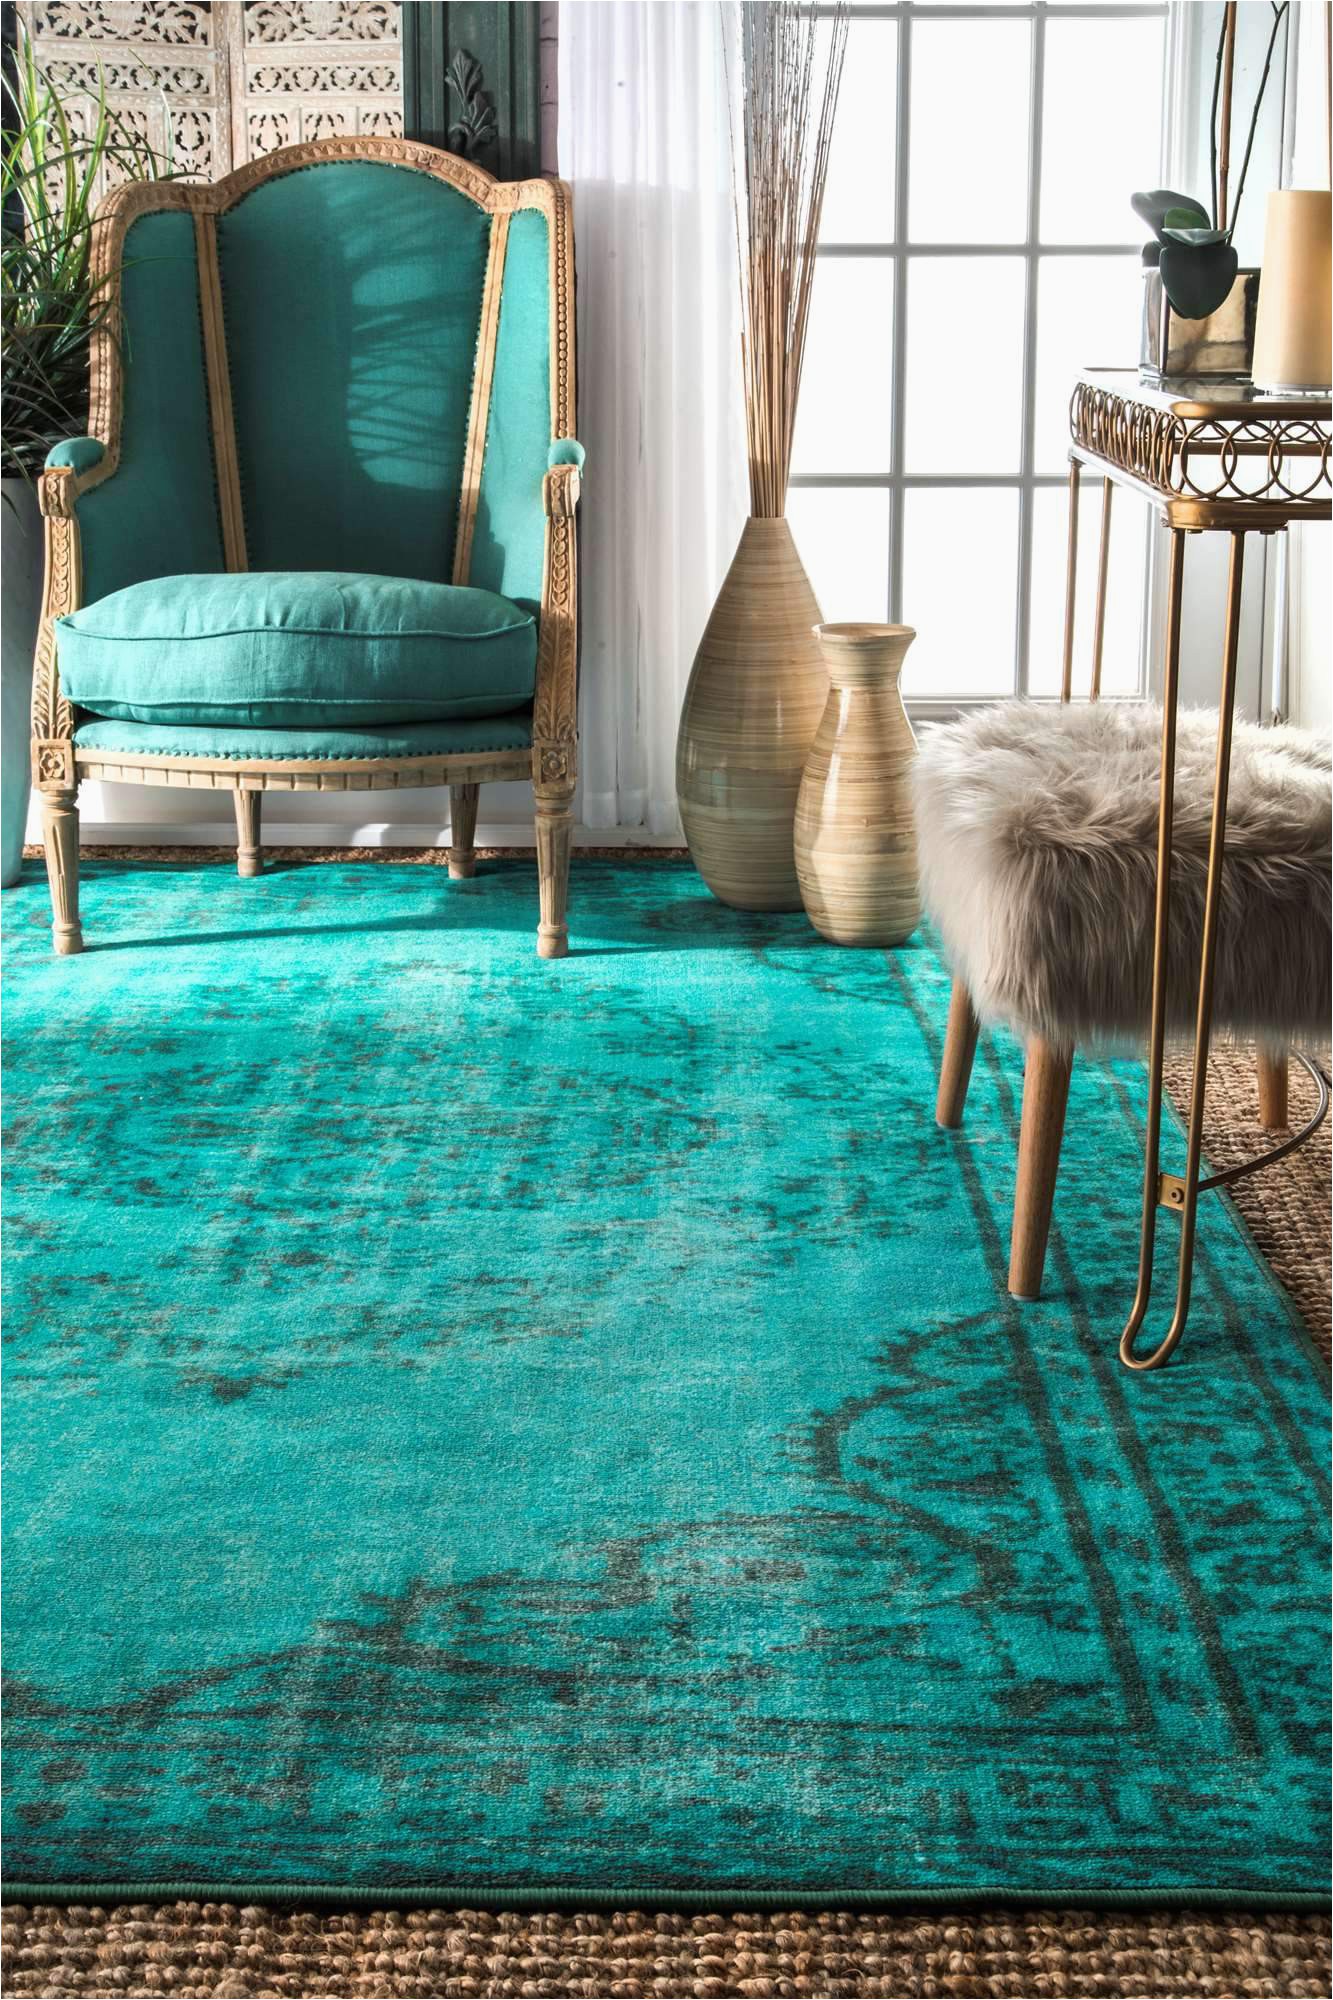 Nuloom Blue Overdyed Rug Nuloom Turquoise Vintage Inspired Overdyed Dire1d area Rug